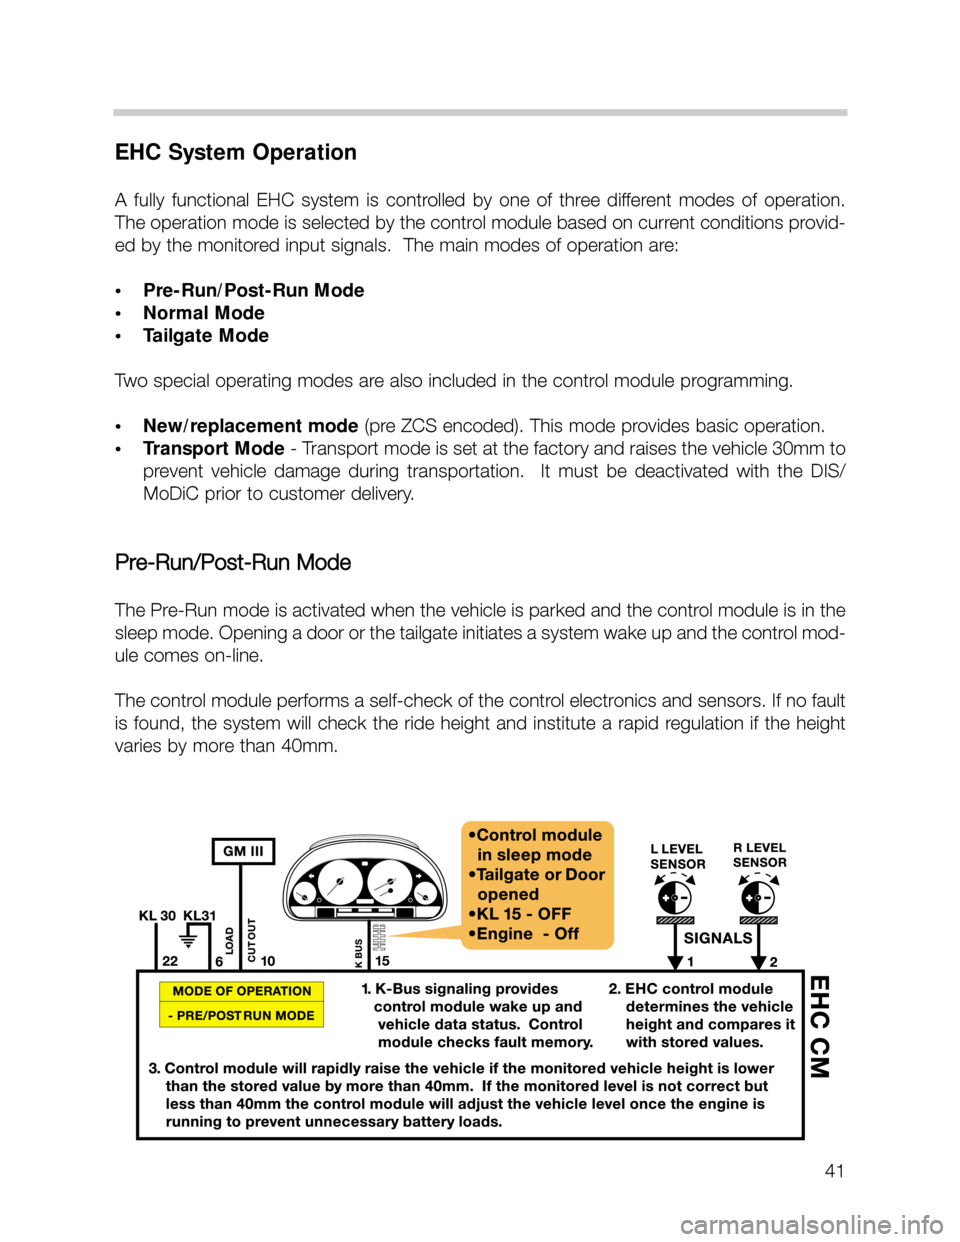 BMW X5 2000 E53 Service Manual 41
EHC System Operation
A  fully  functional  EHC  system  is  controlled  by  one  of  three  different  modes  of  operation.
The operation mode is selected by the control module based on current co